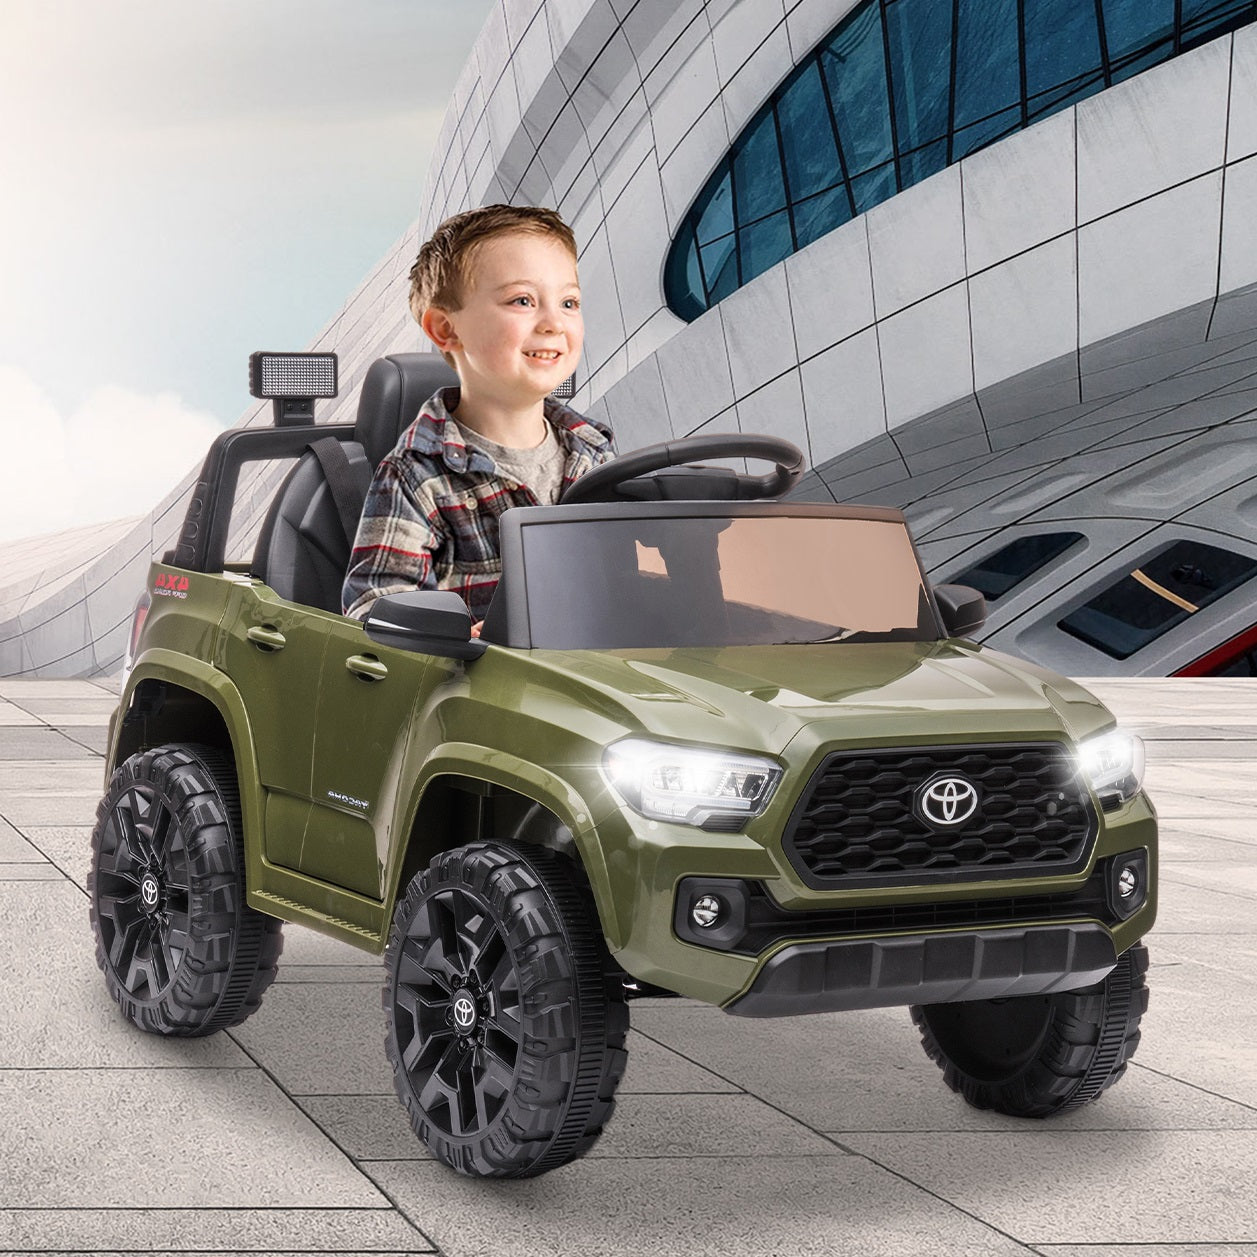 SYNGAR Green 12 V Powered Ride On Car Toyota Tacoma Licenced with Remote Control and MP3 Player for Girls Boys 2 3 4 Years